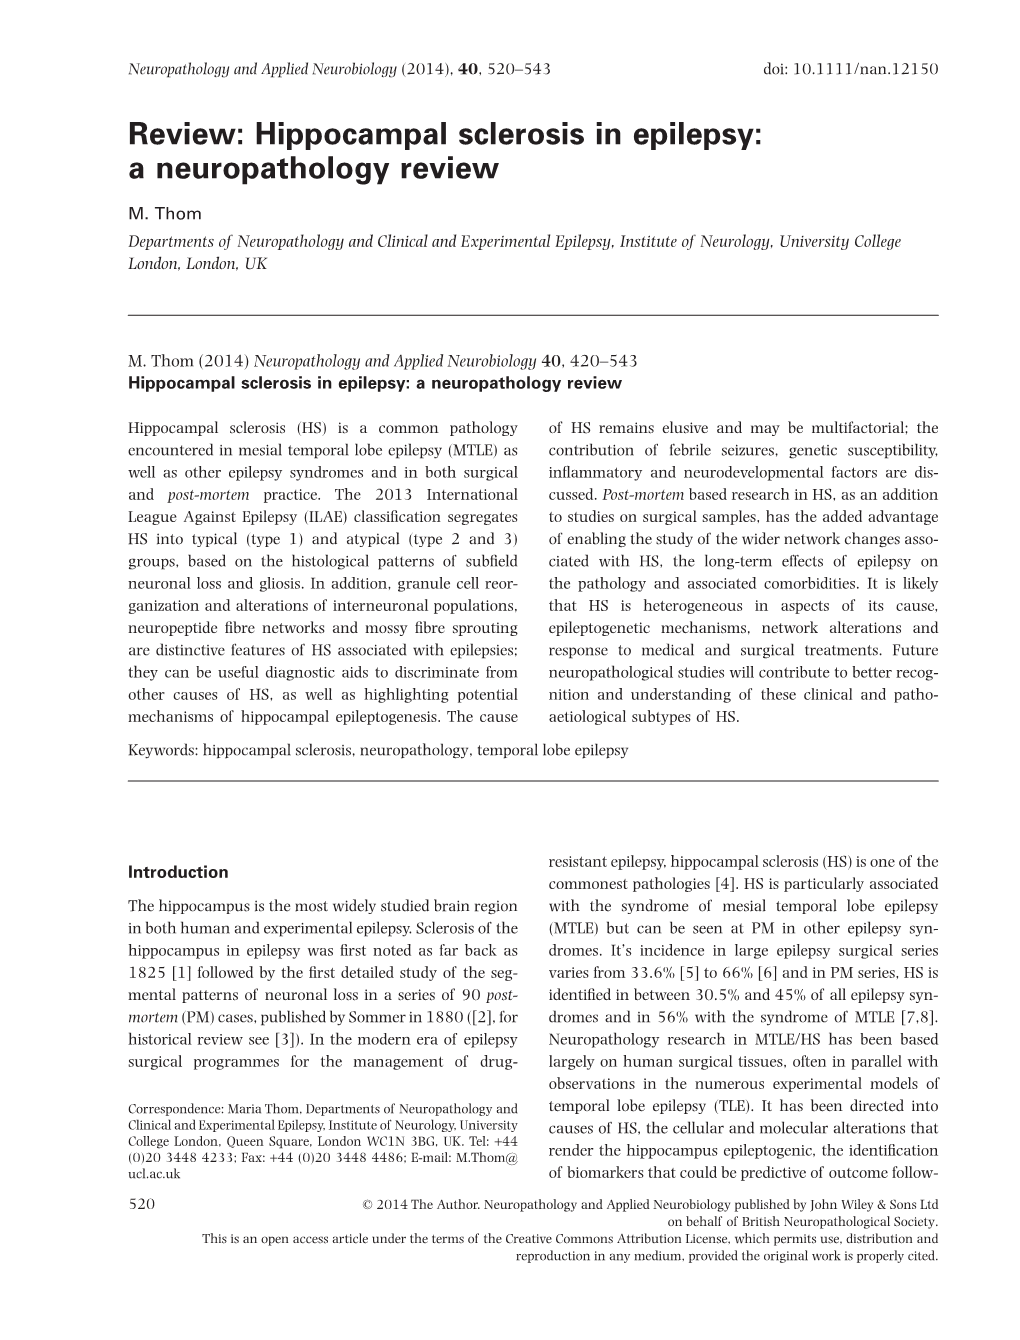 Hippocampal Sclerosis in Epilepsy: a Neuropathology Review